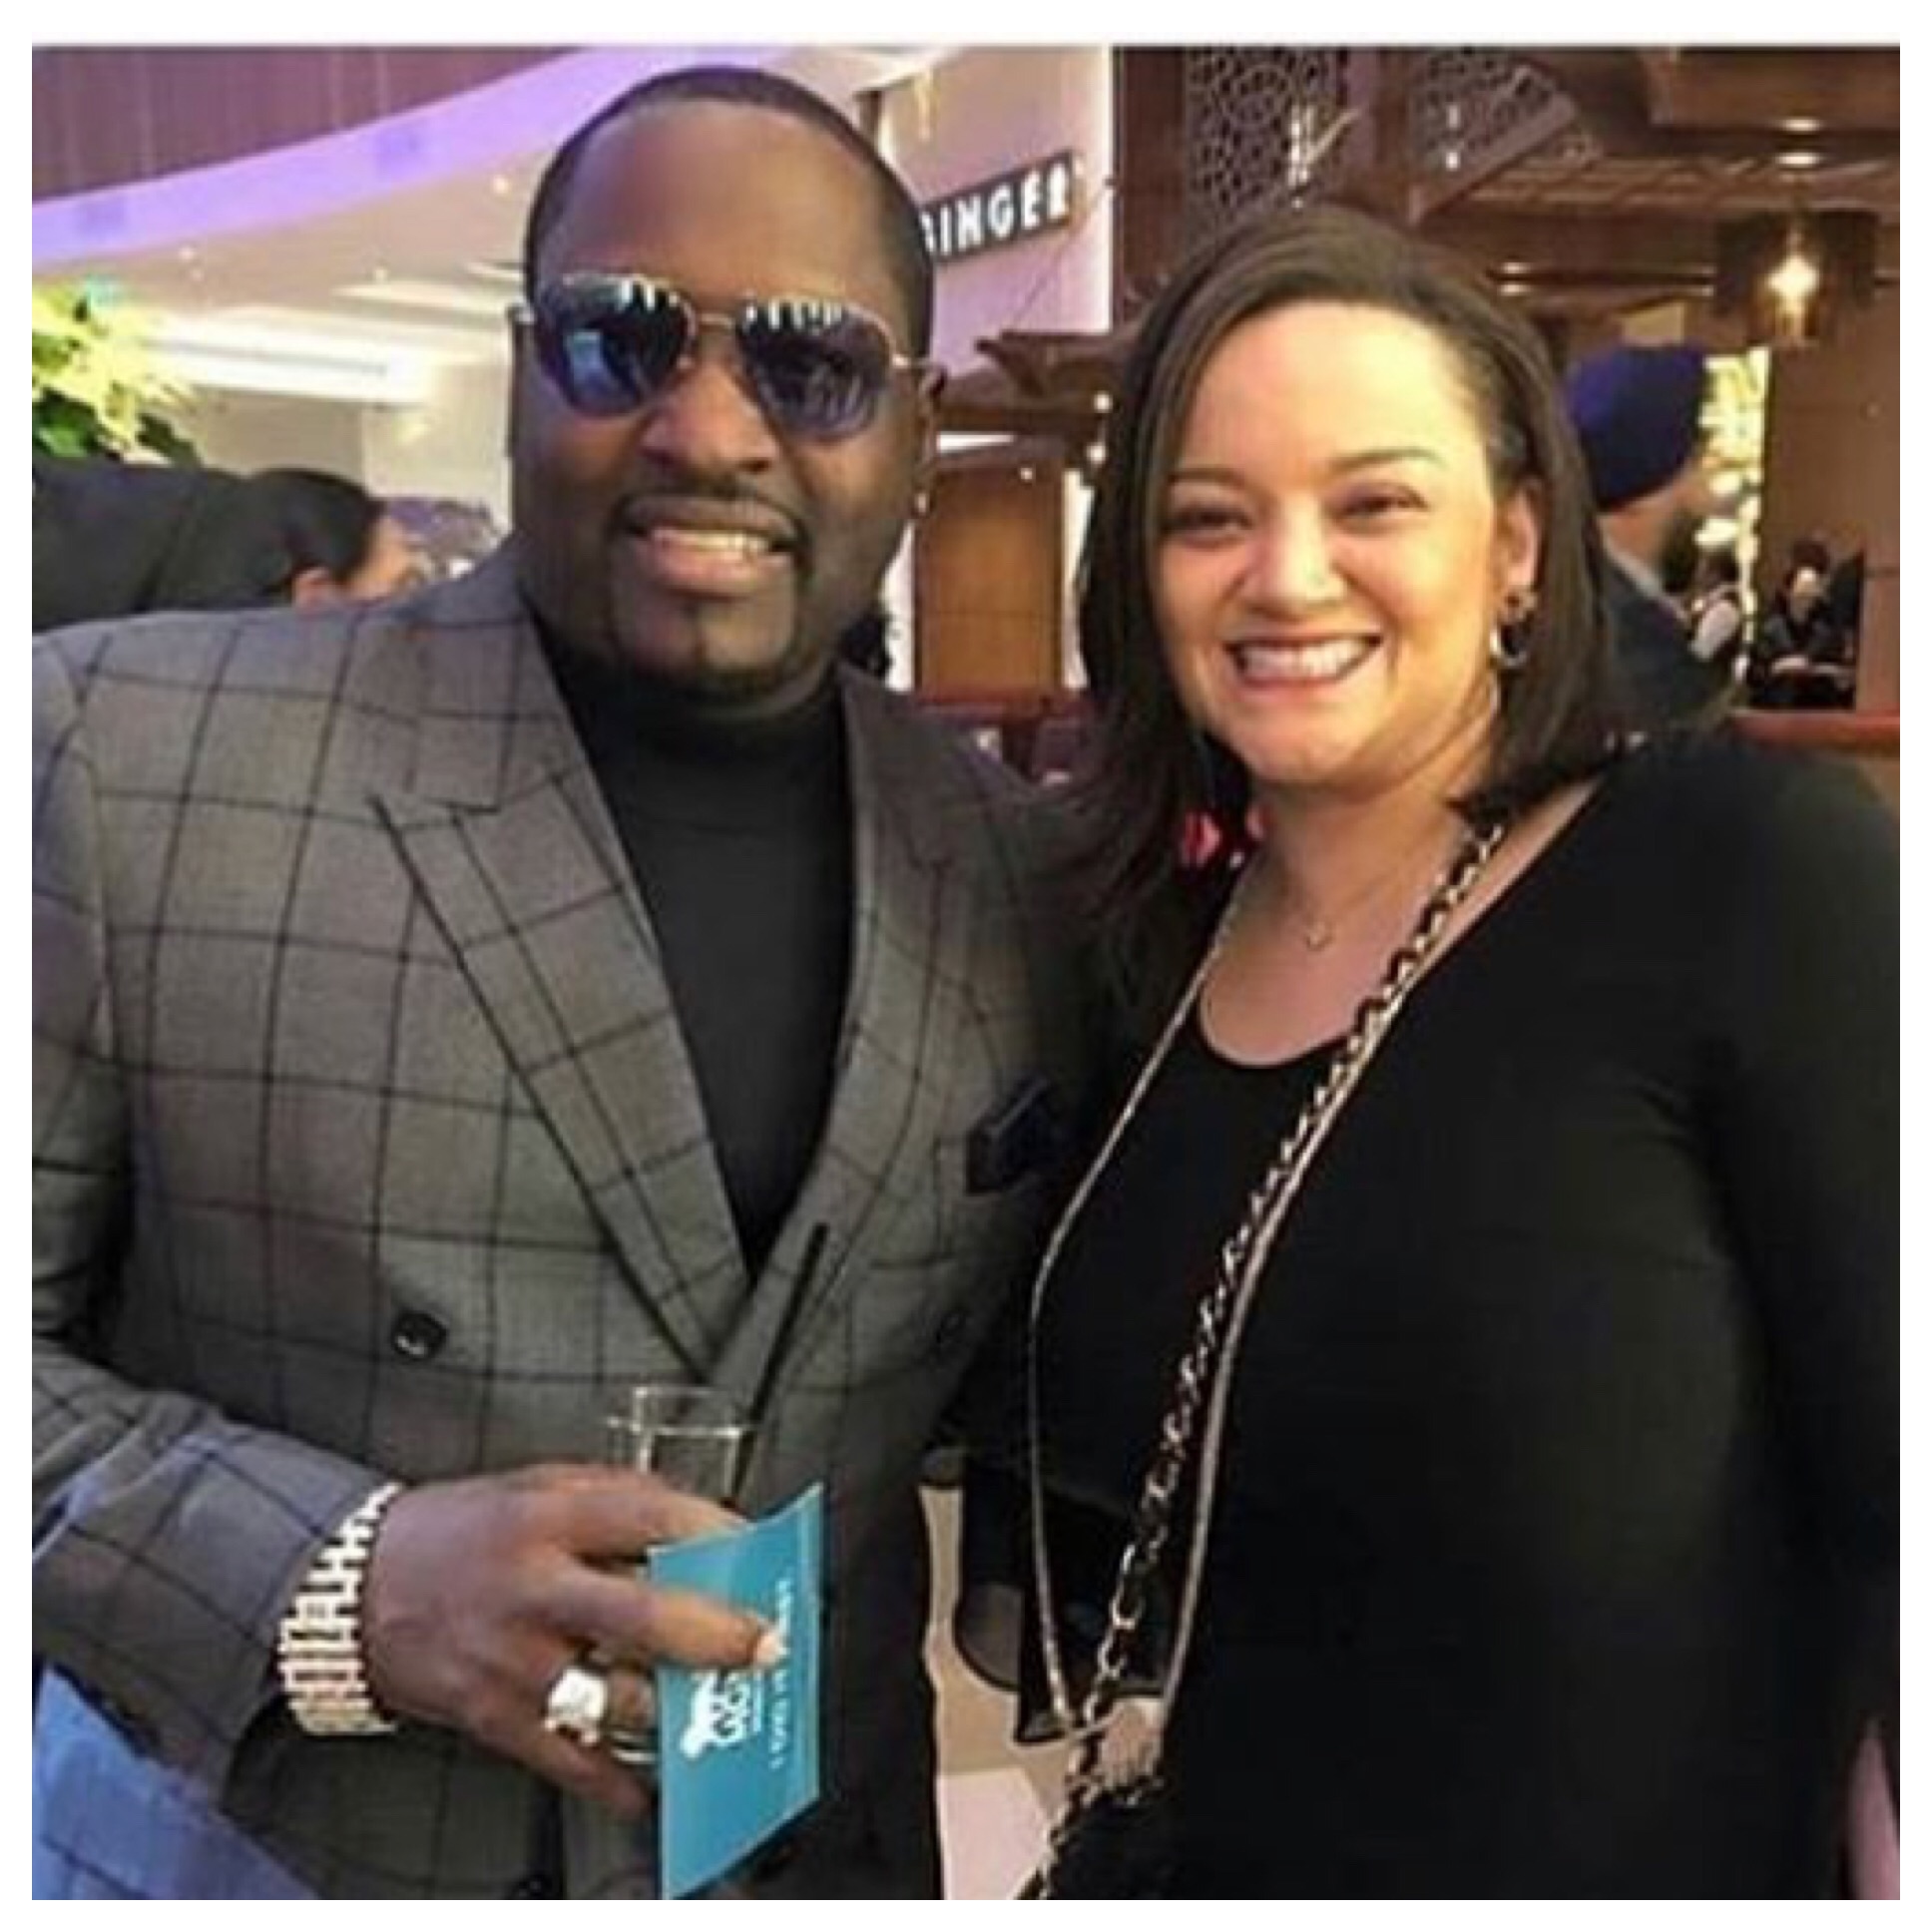 Oops. Singer Stacy Lattisaw's Family Resents Johnny Gill Talking About